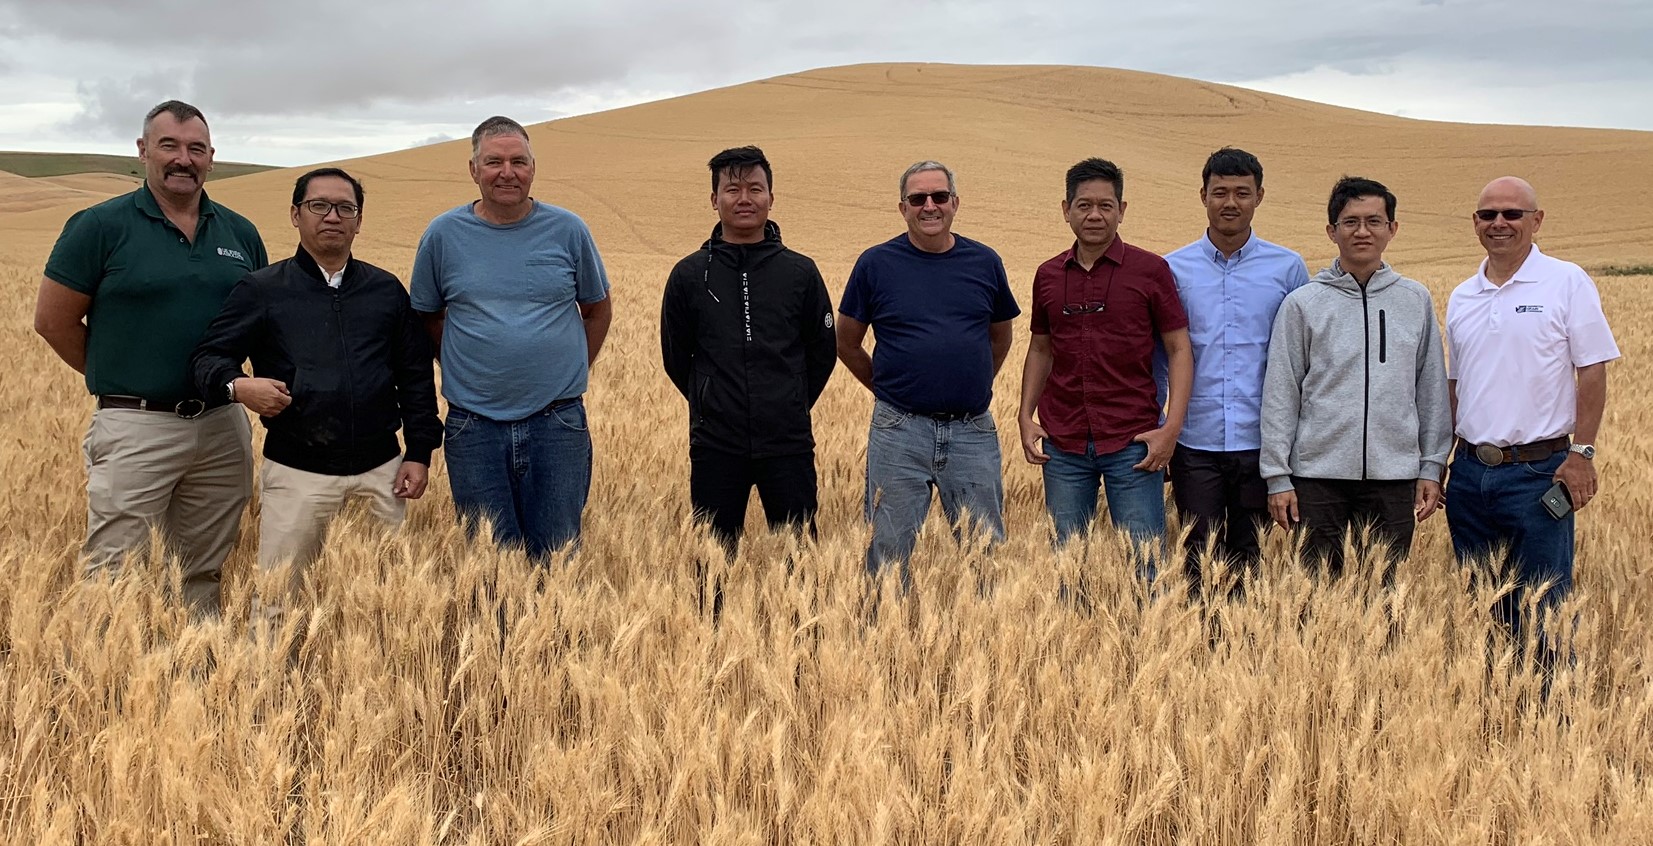 A group of men in a wheat field.